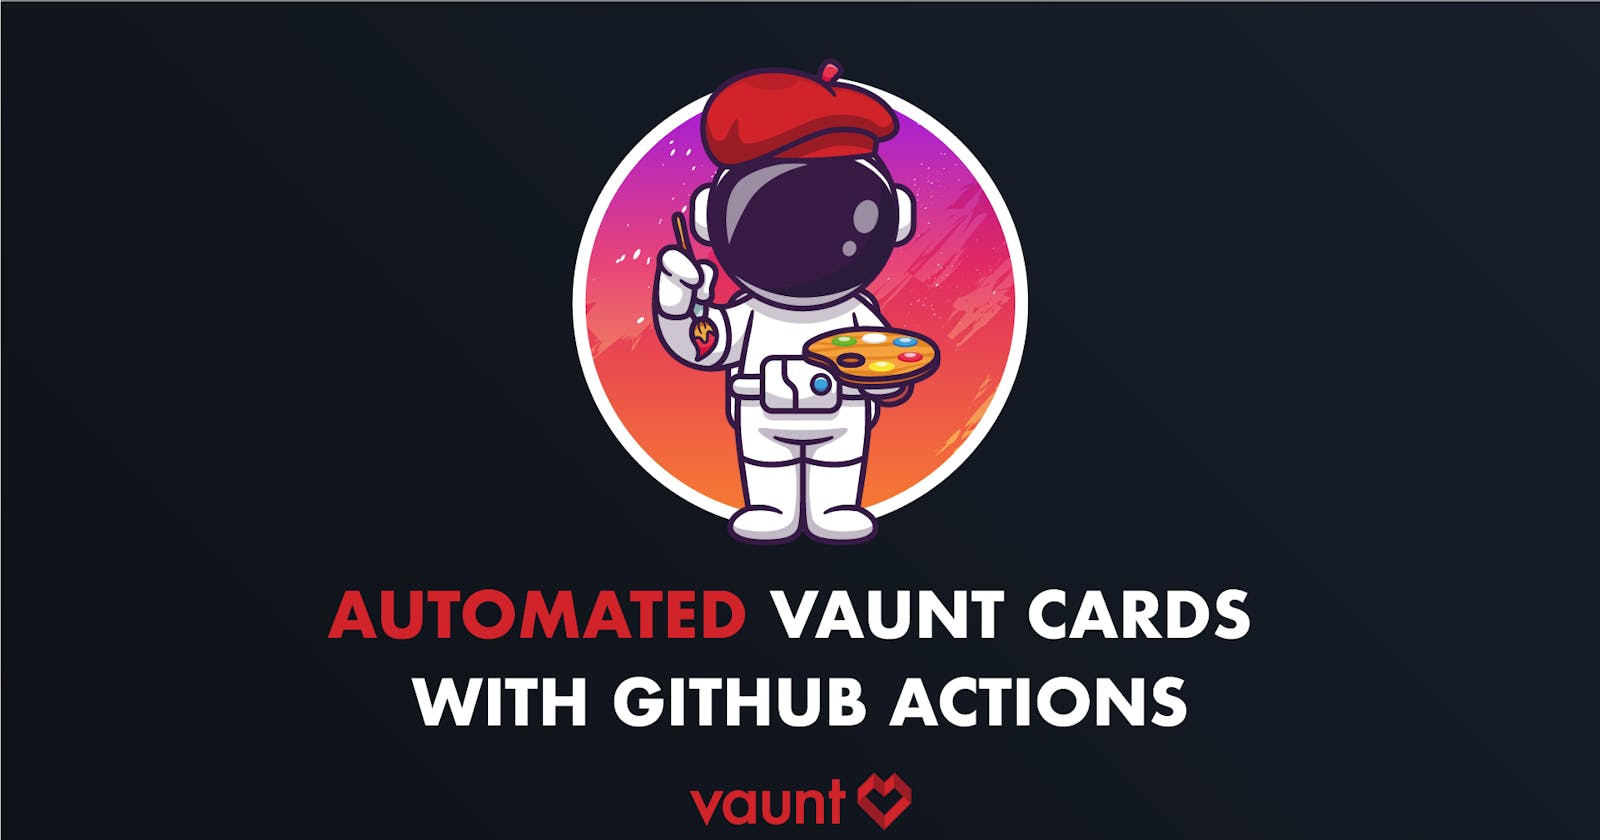 Automated Vaunt Cards with GitHub Actions